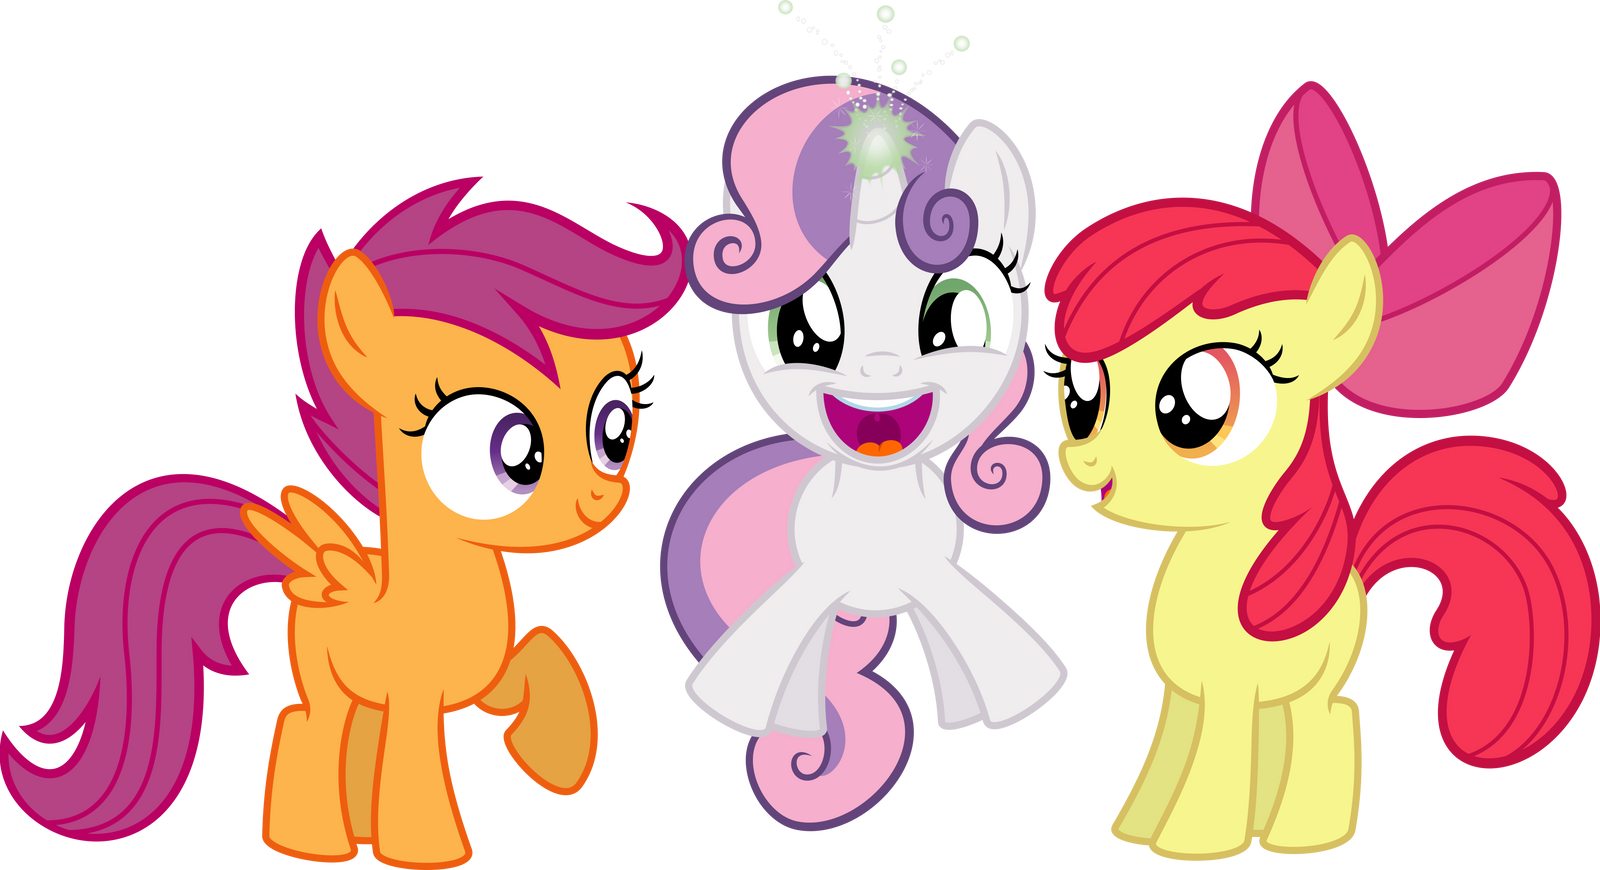 [Bild: cmc___let_the_sparks_fly__by_psychicwalnut-d6q5cg5.png]